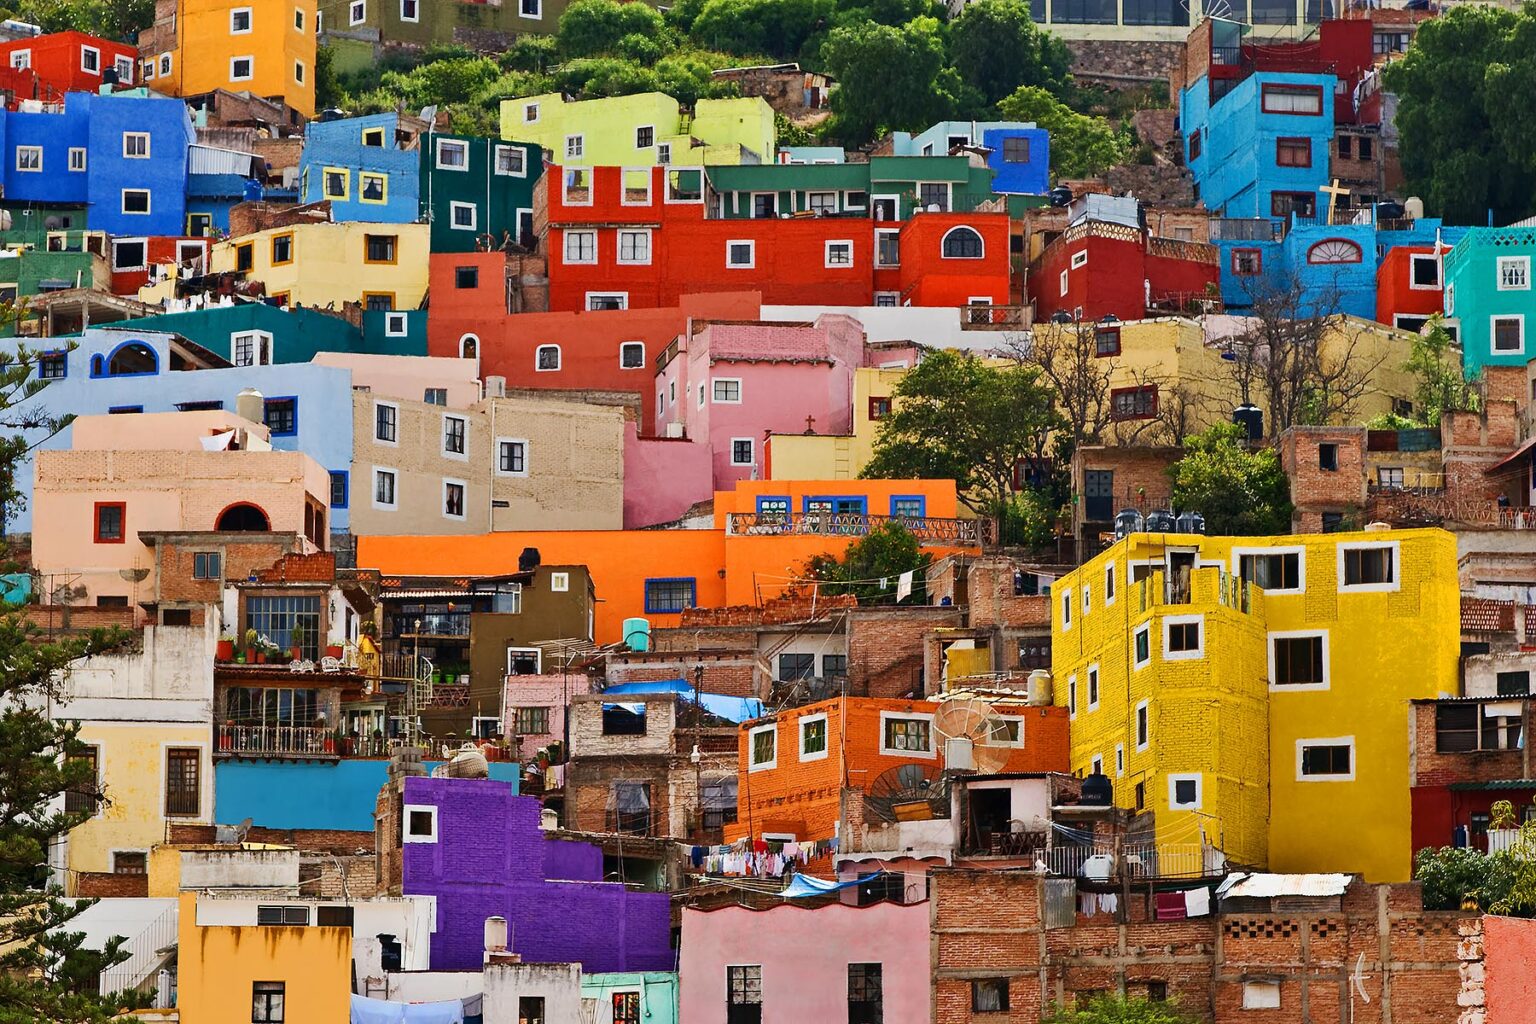 The colorful houses of Guanajuato Mexico